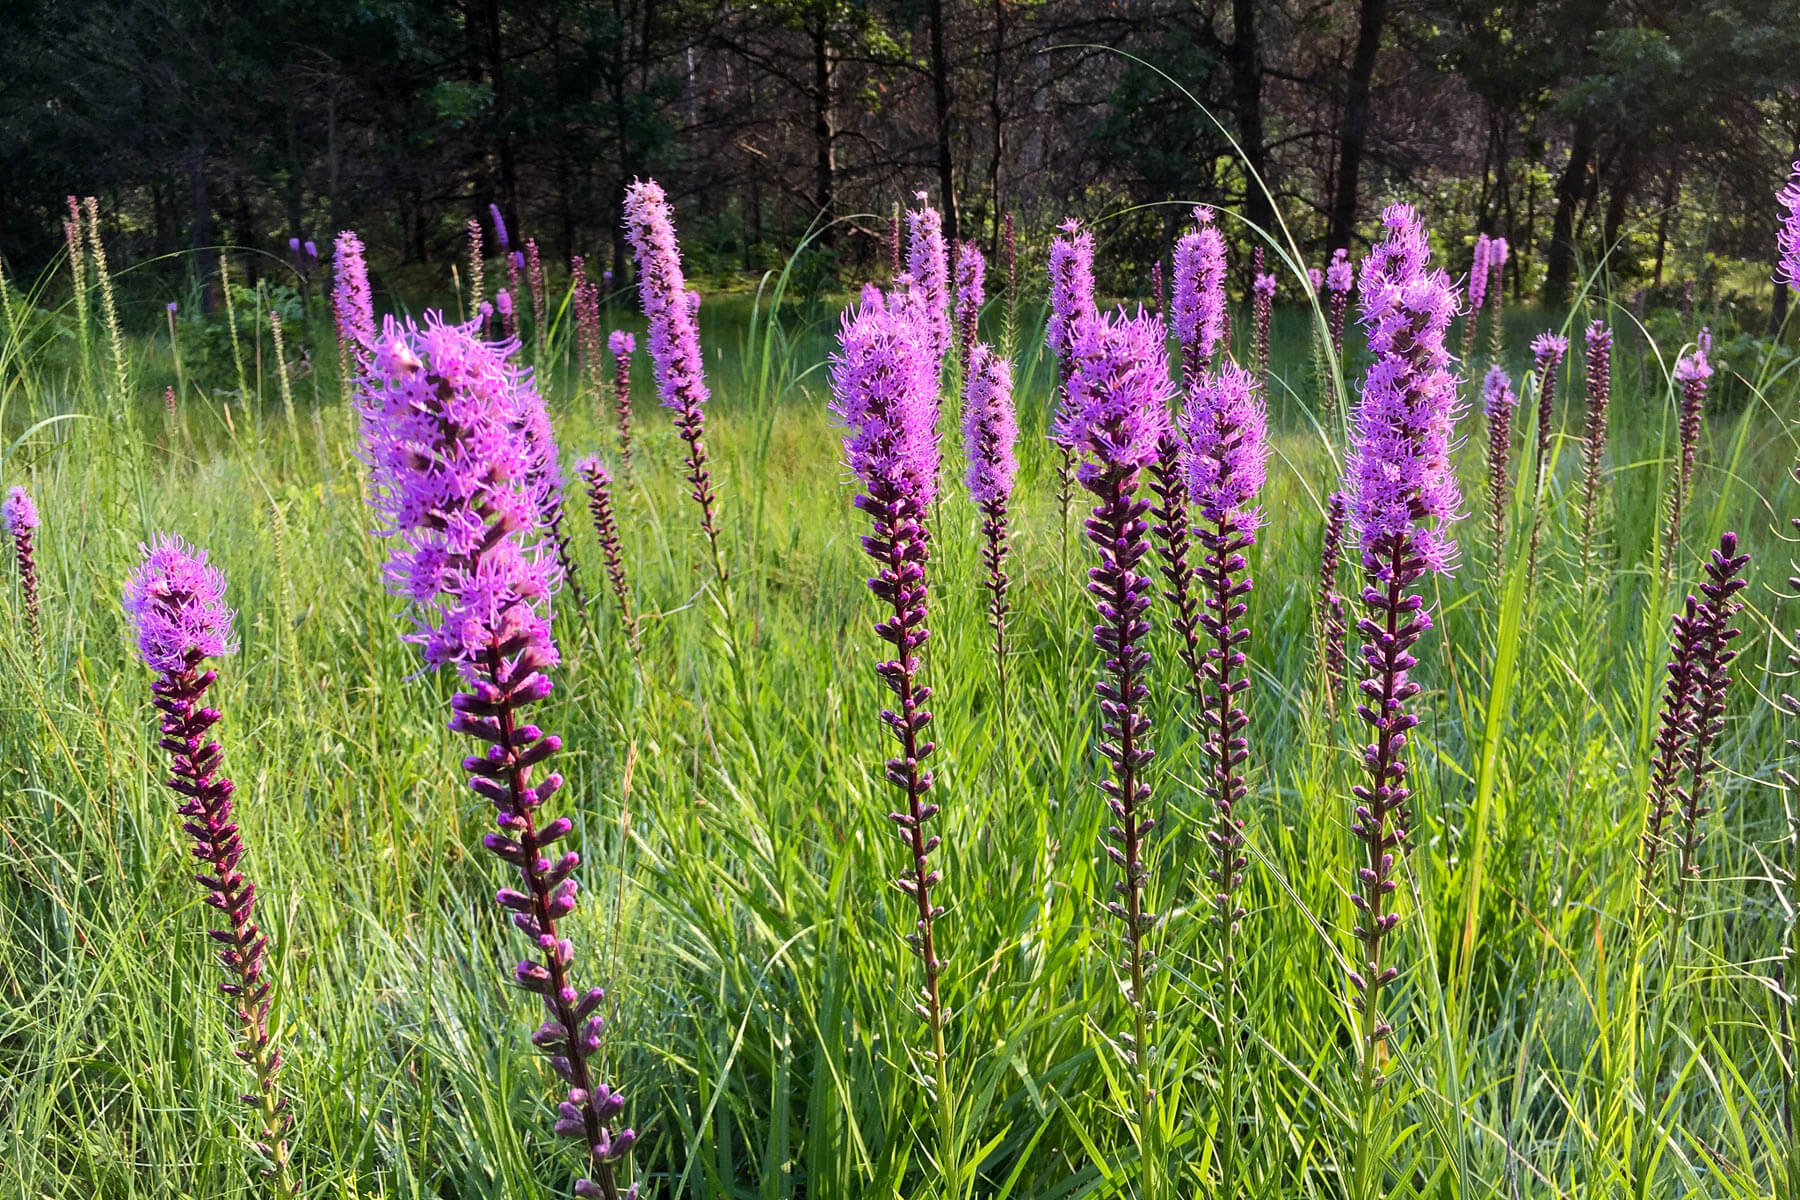 Several tall purple clusters of flowers stand in a green field